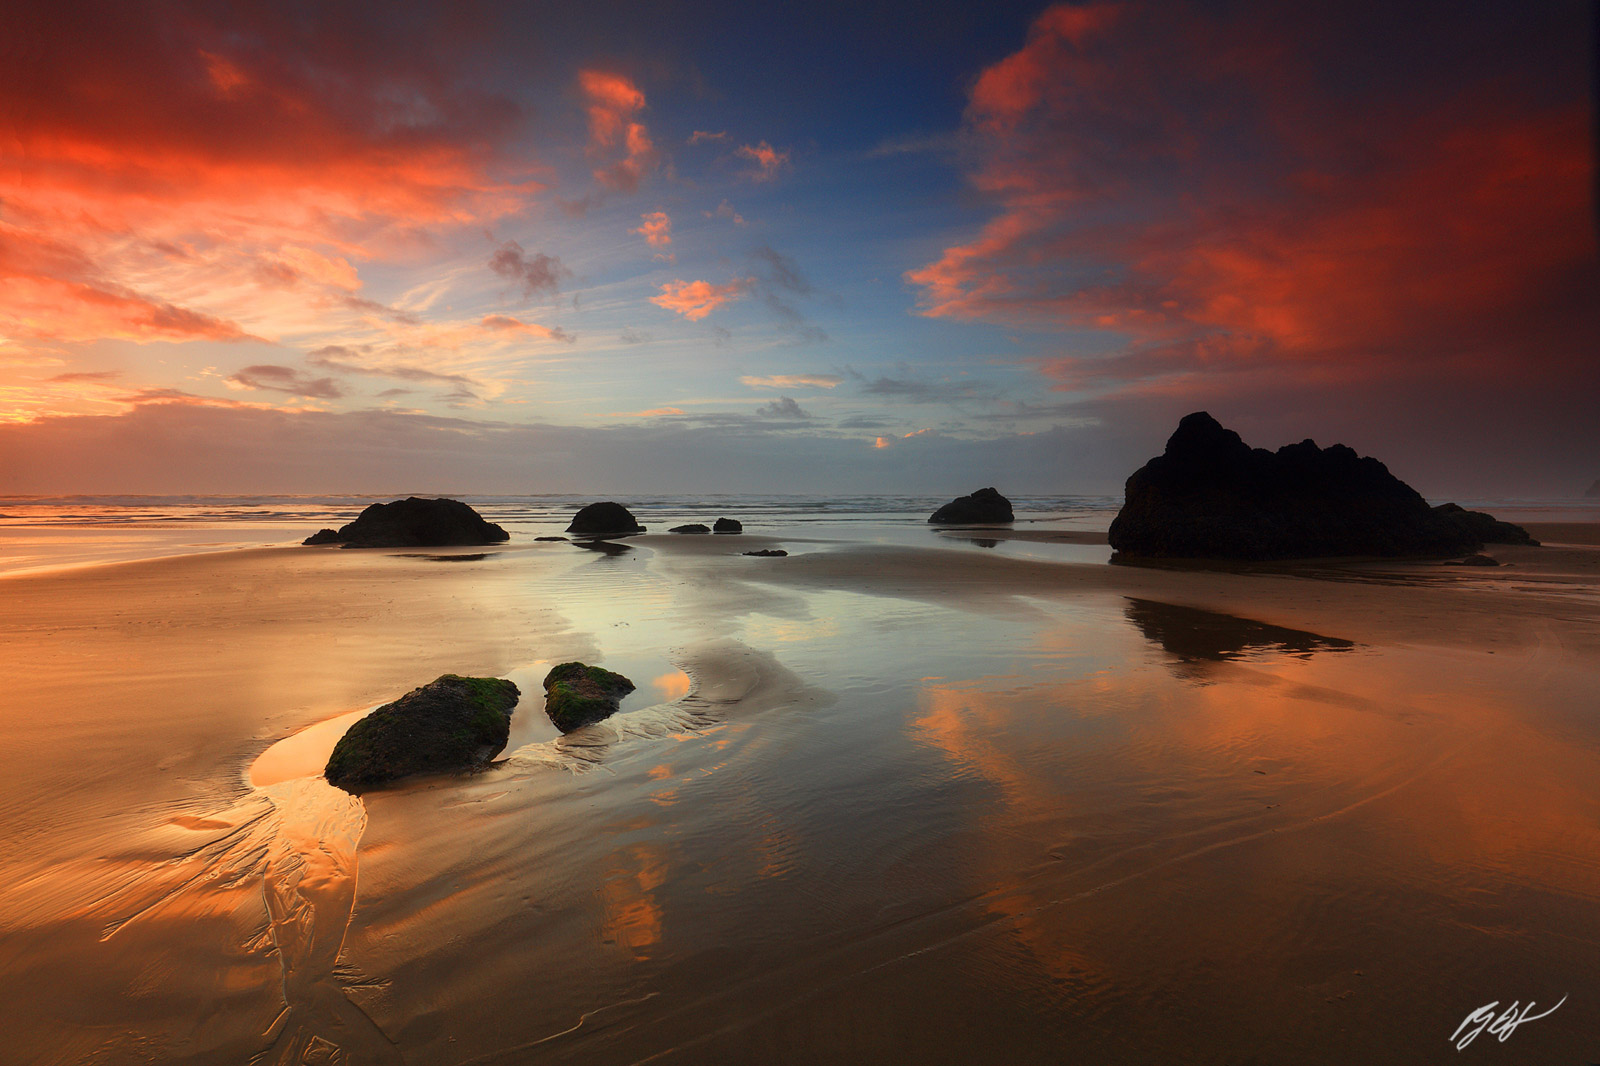 Sunset Reflection from the South End of Cannon Beach on the Oregon Coast